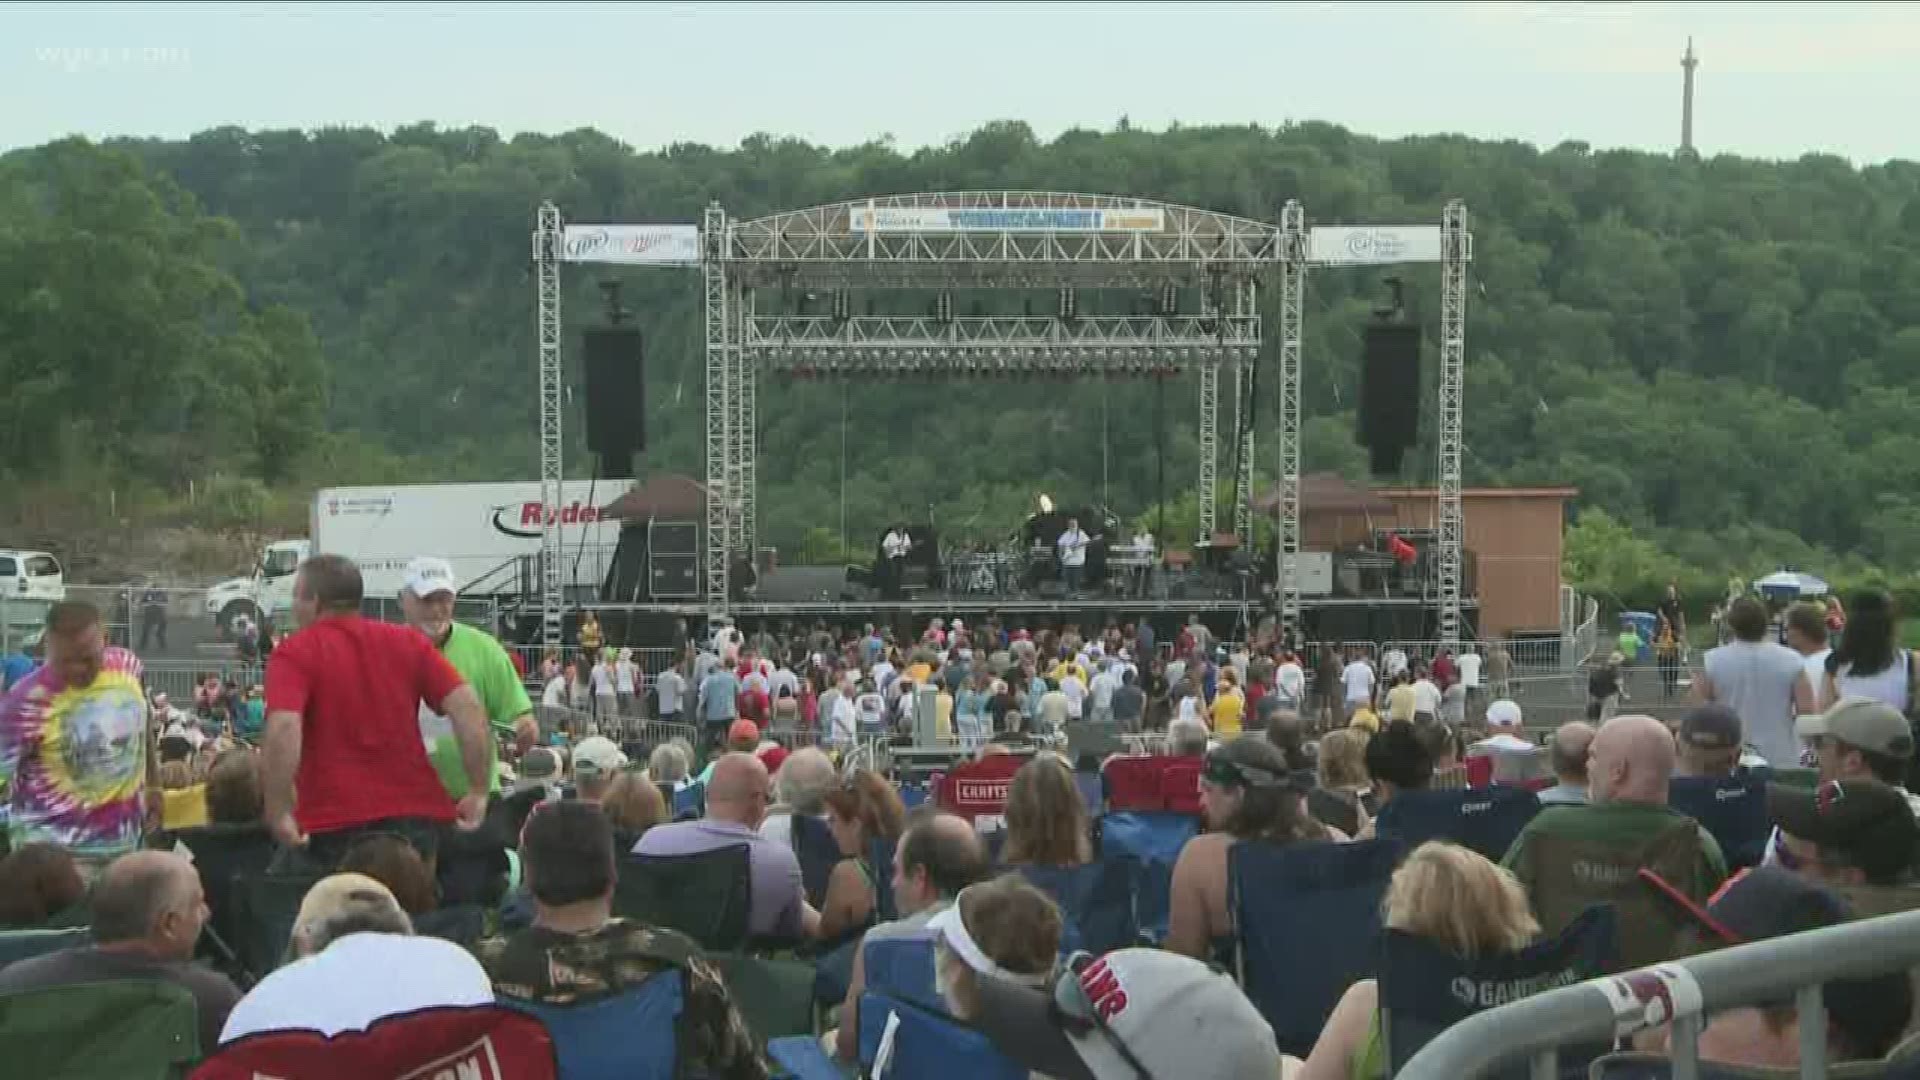 Some Western New Yorkers say there weren't enough parking spots for people with disabilities at ArtPark.